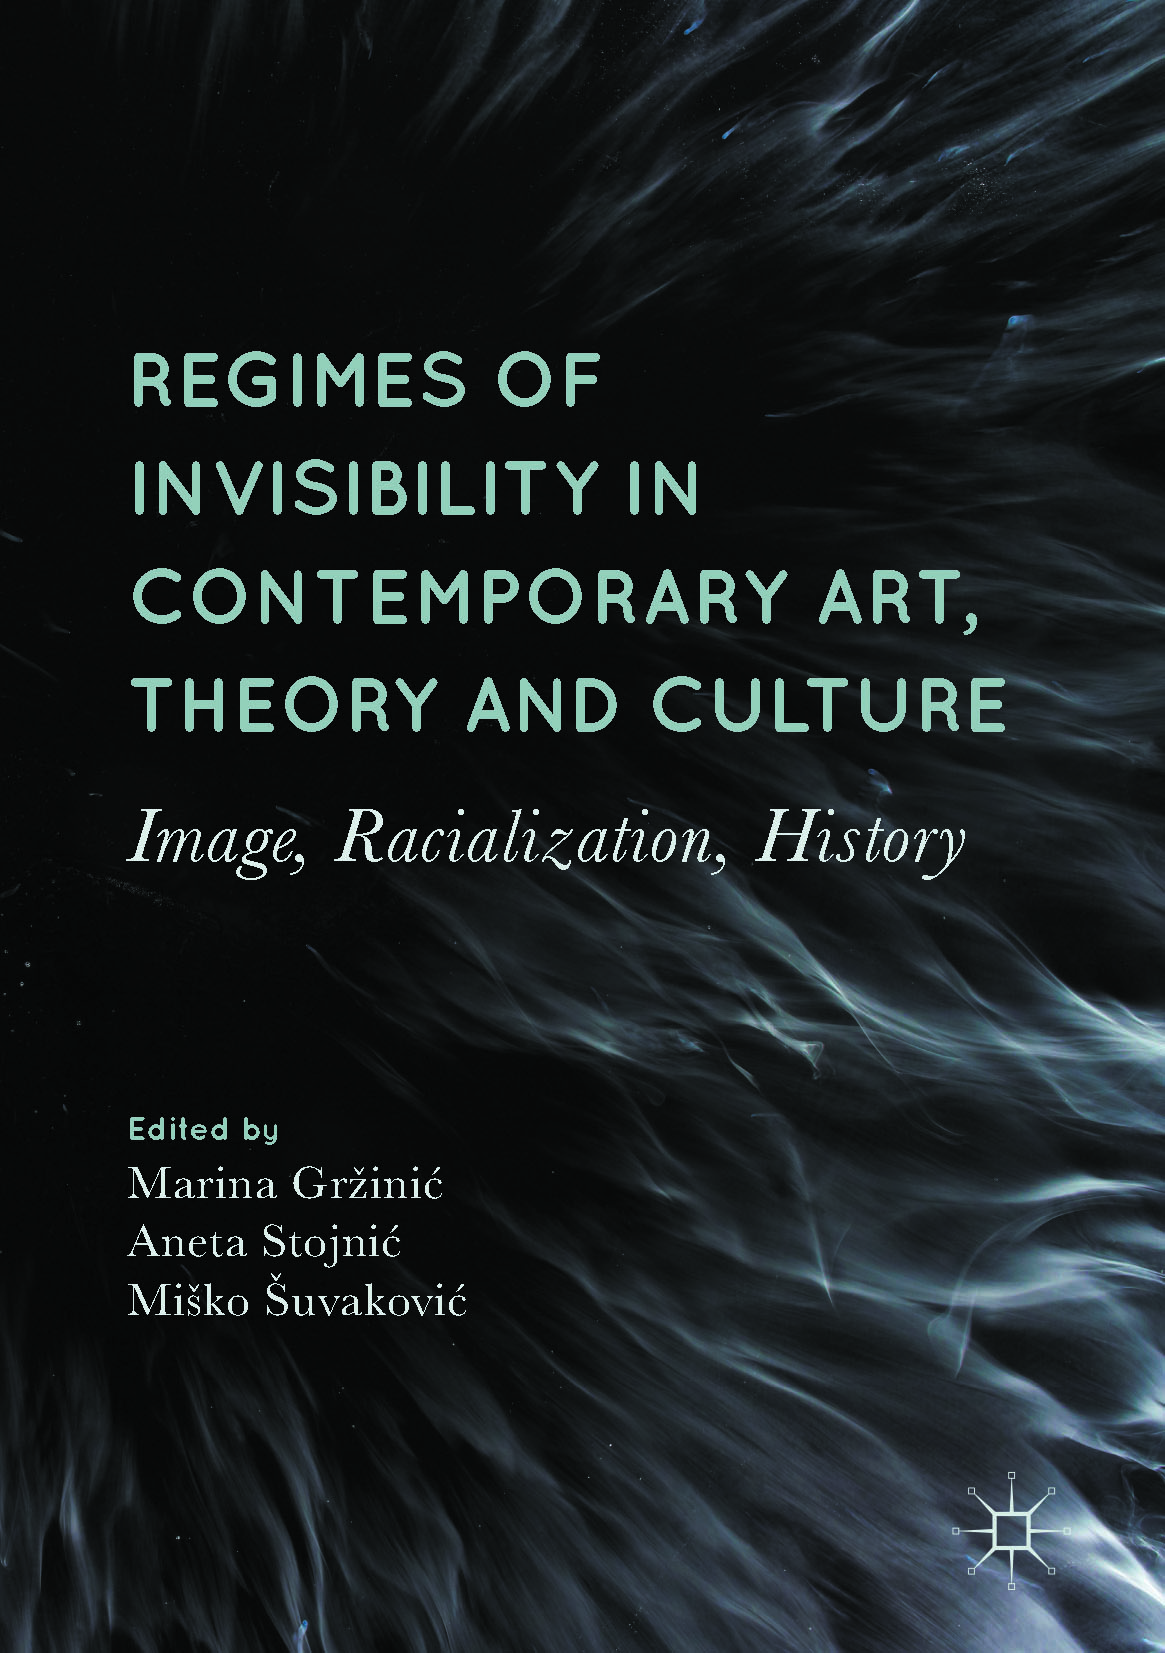 Gržinić, Marina - Regimes of Invisibility in Contemporary Art, Theory and Culture, ebook